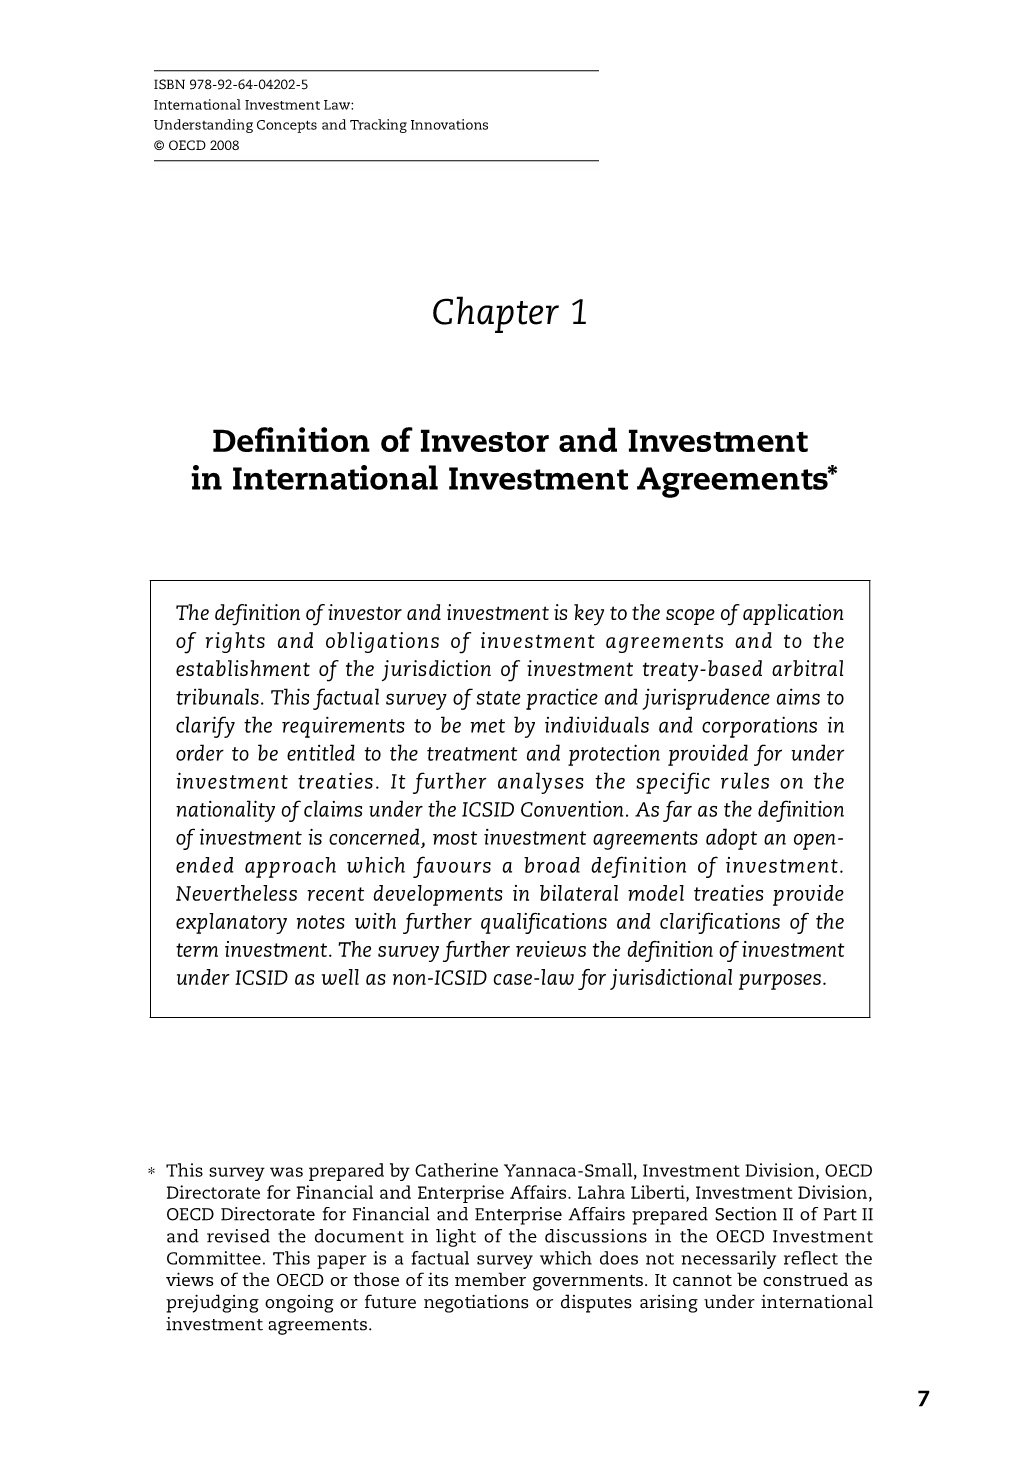 International Investment Law: Understanding Concepts and Tracking Innovations © OECD 2008